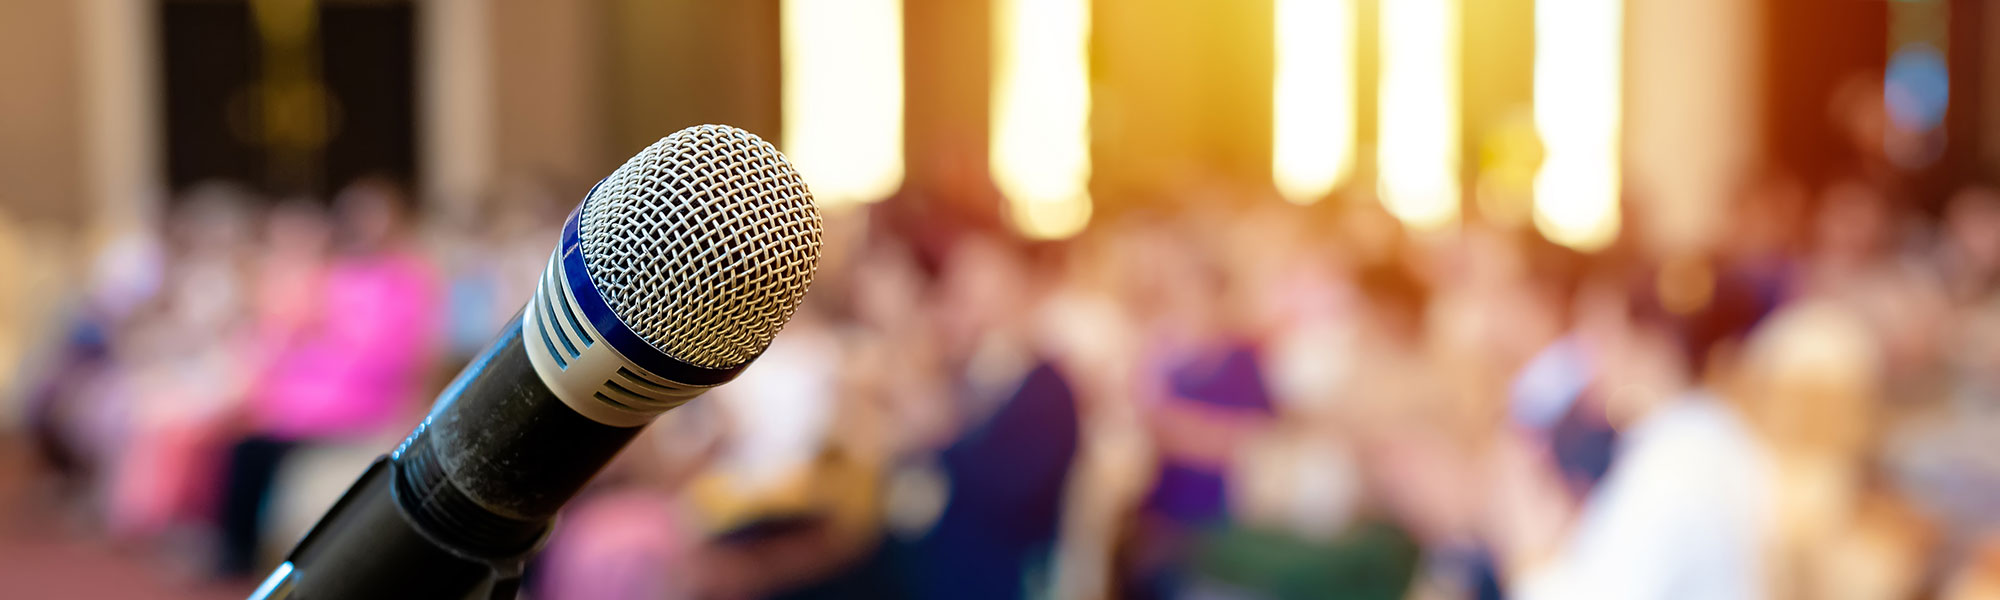 Microphone with a blurred conference setting in the background.